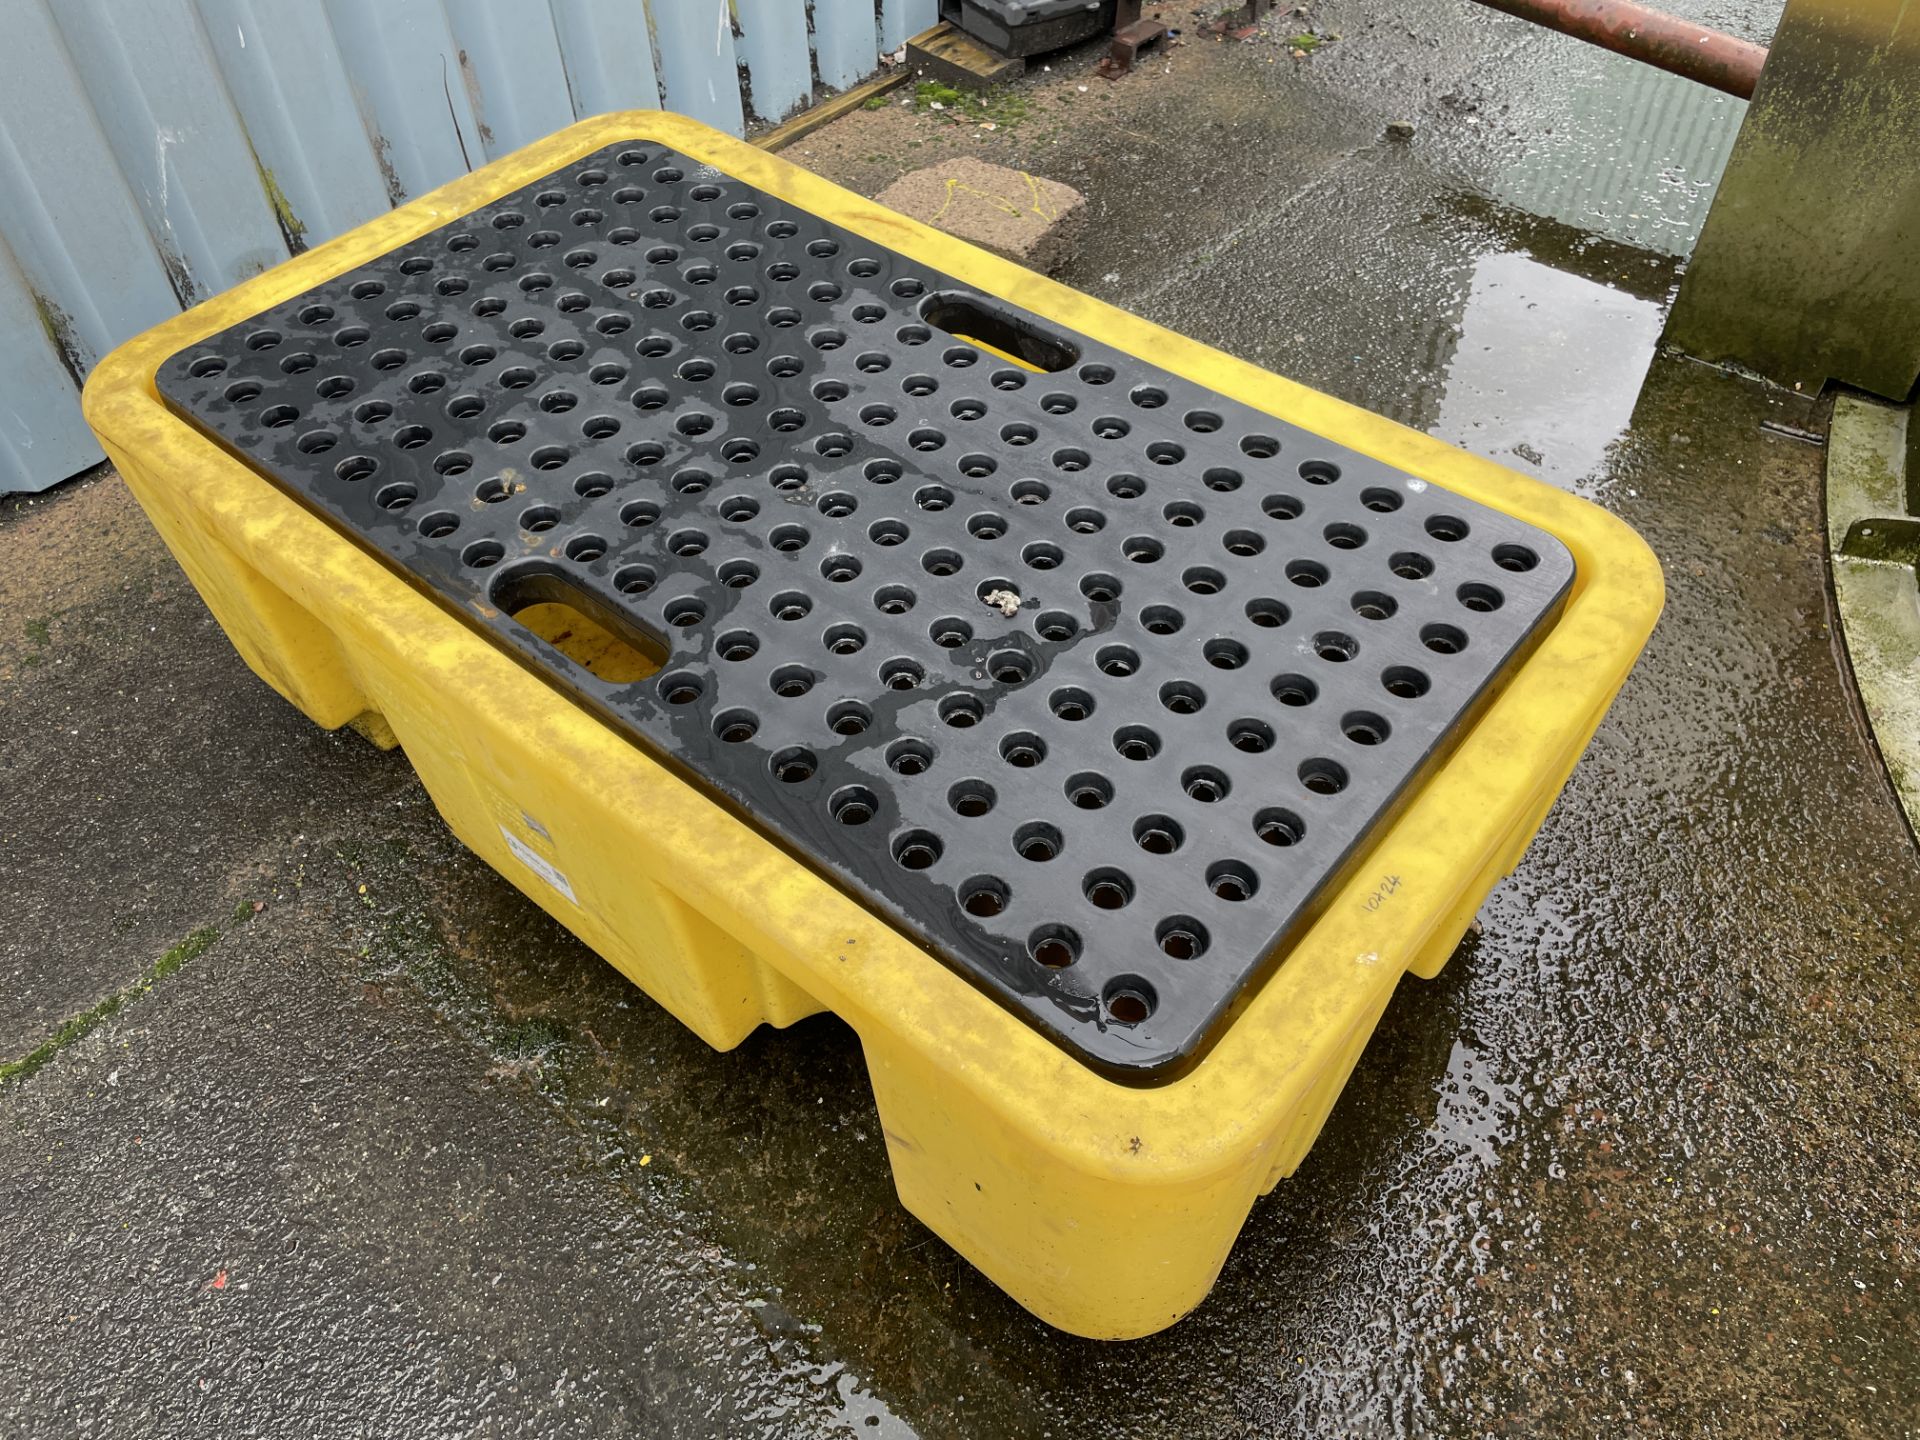 Plastic Bund Stand, approx. 1.3m x 750mm (Contractors take out charge - £5) Please read the